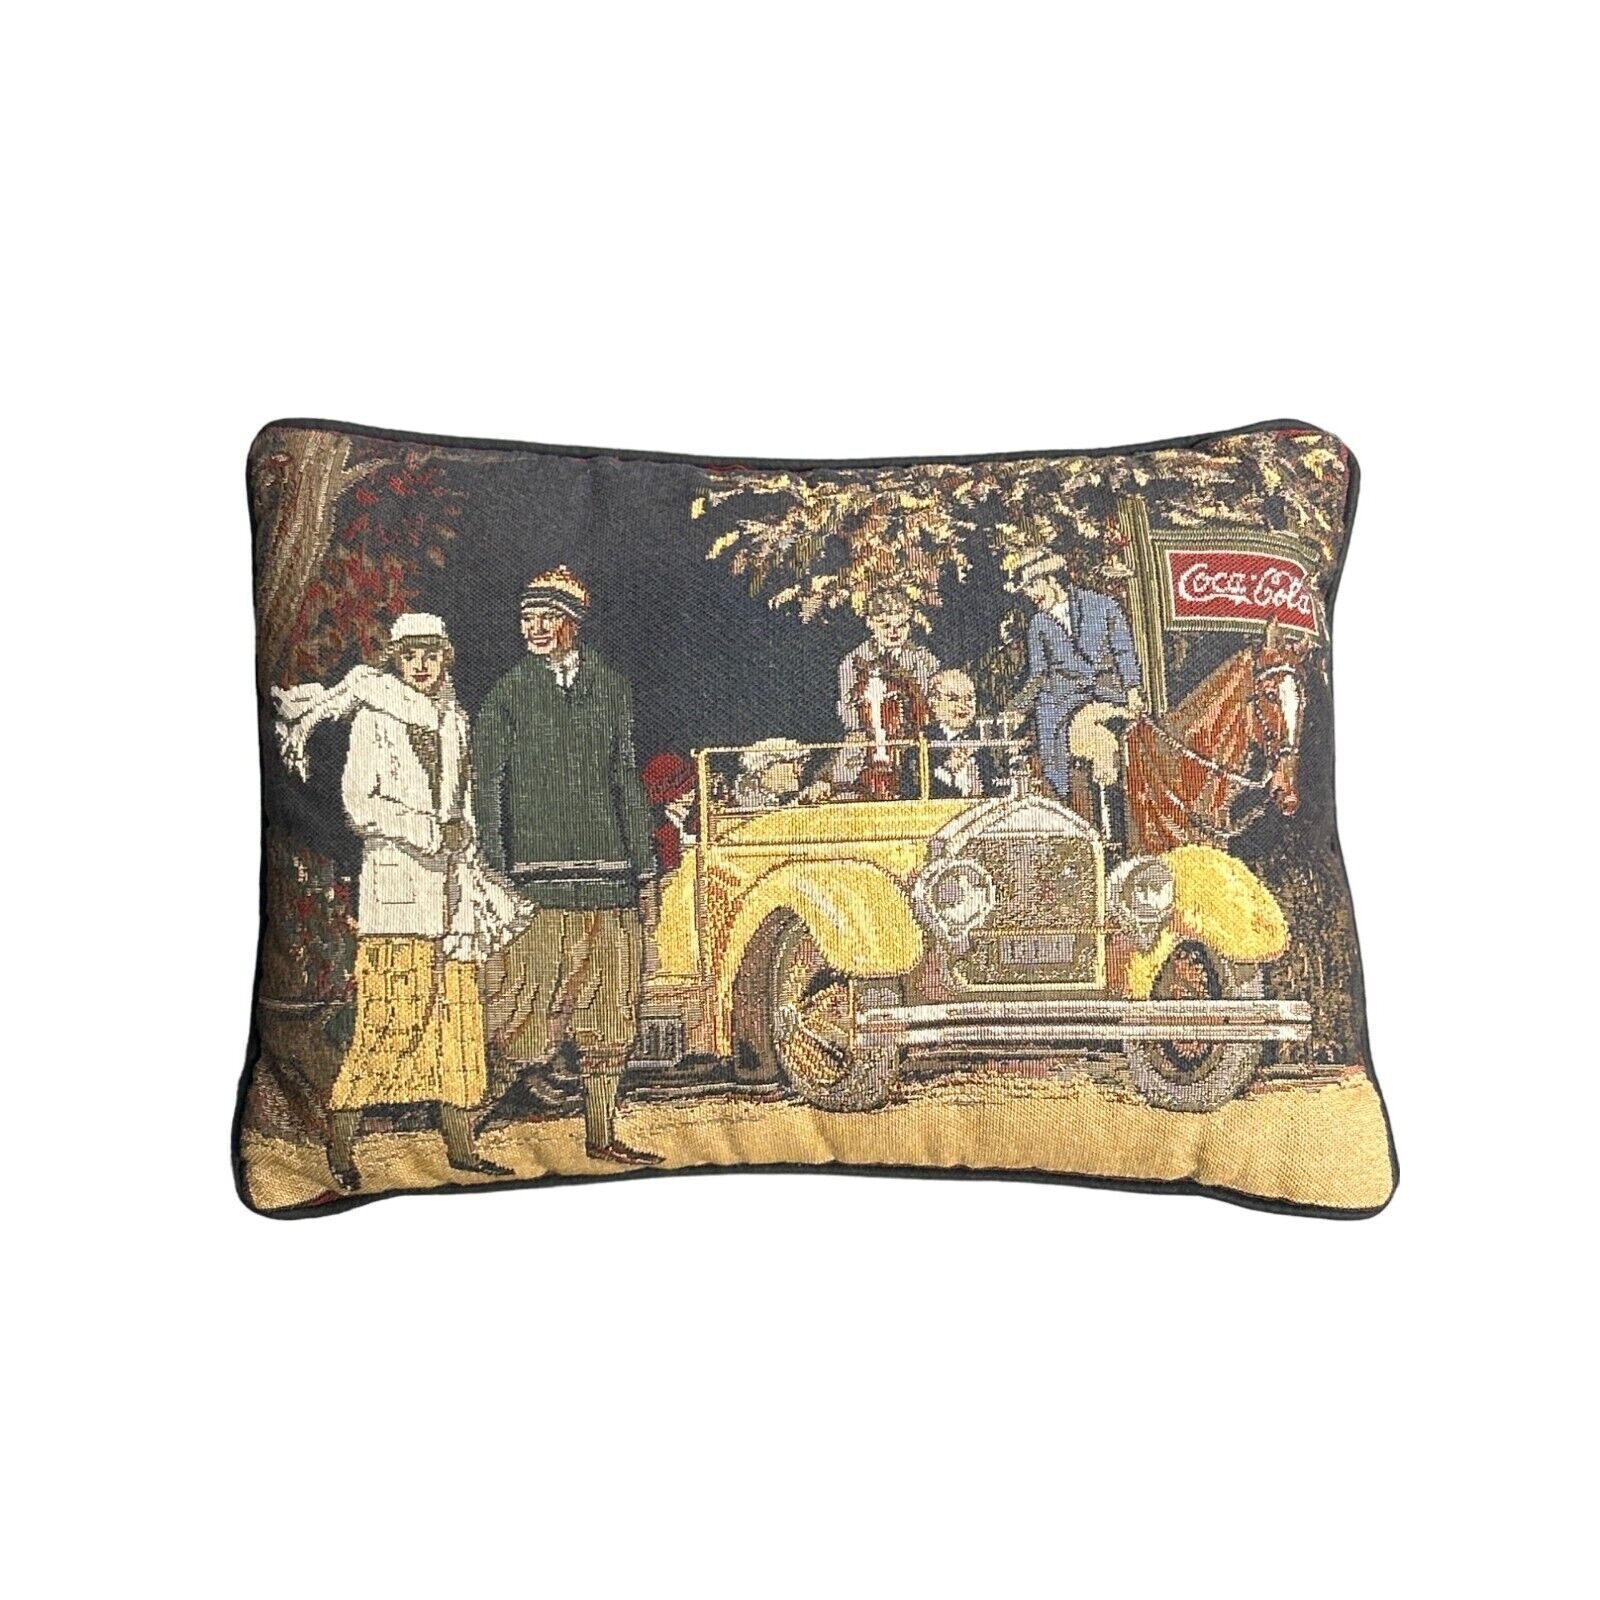 Coca Cola Tapestry Throw Sofa Couch Chair Pillow Vintage Scene Cars People Horse